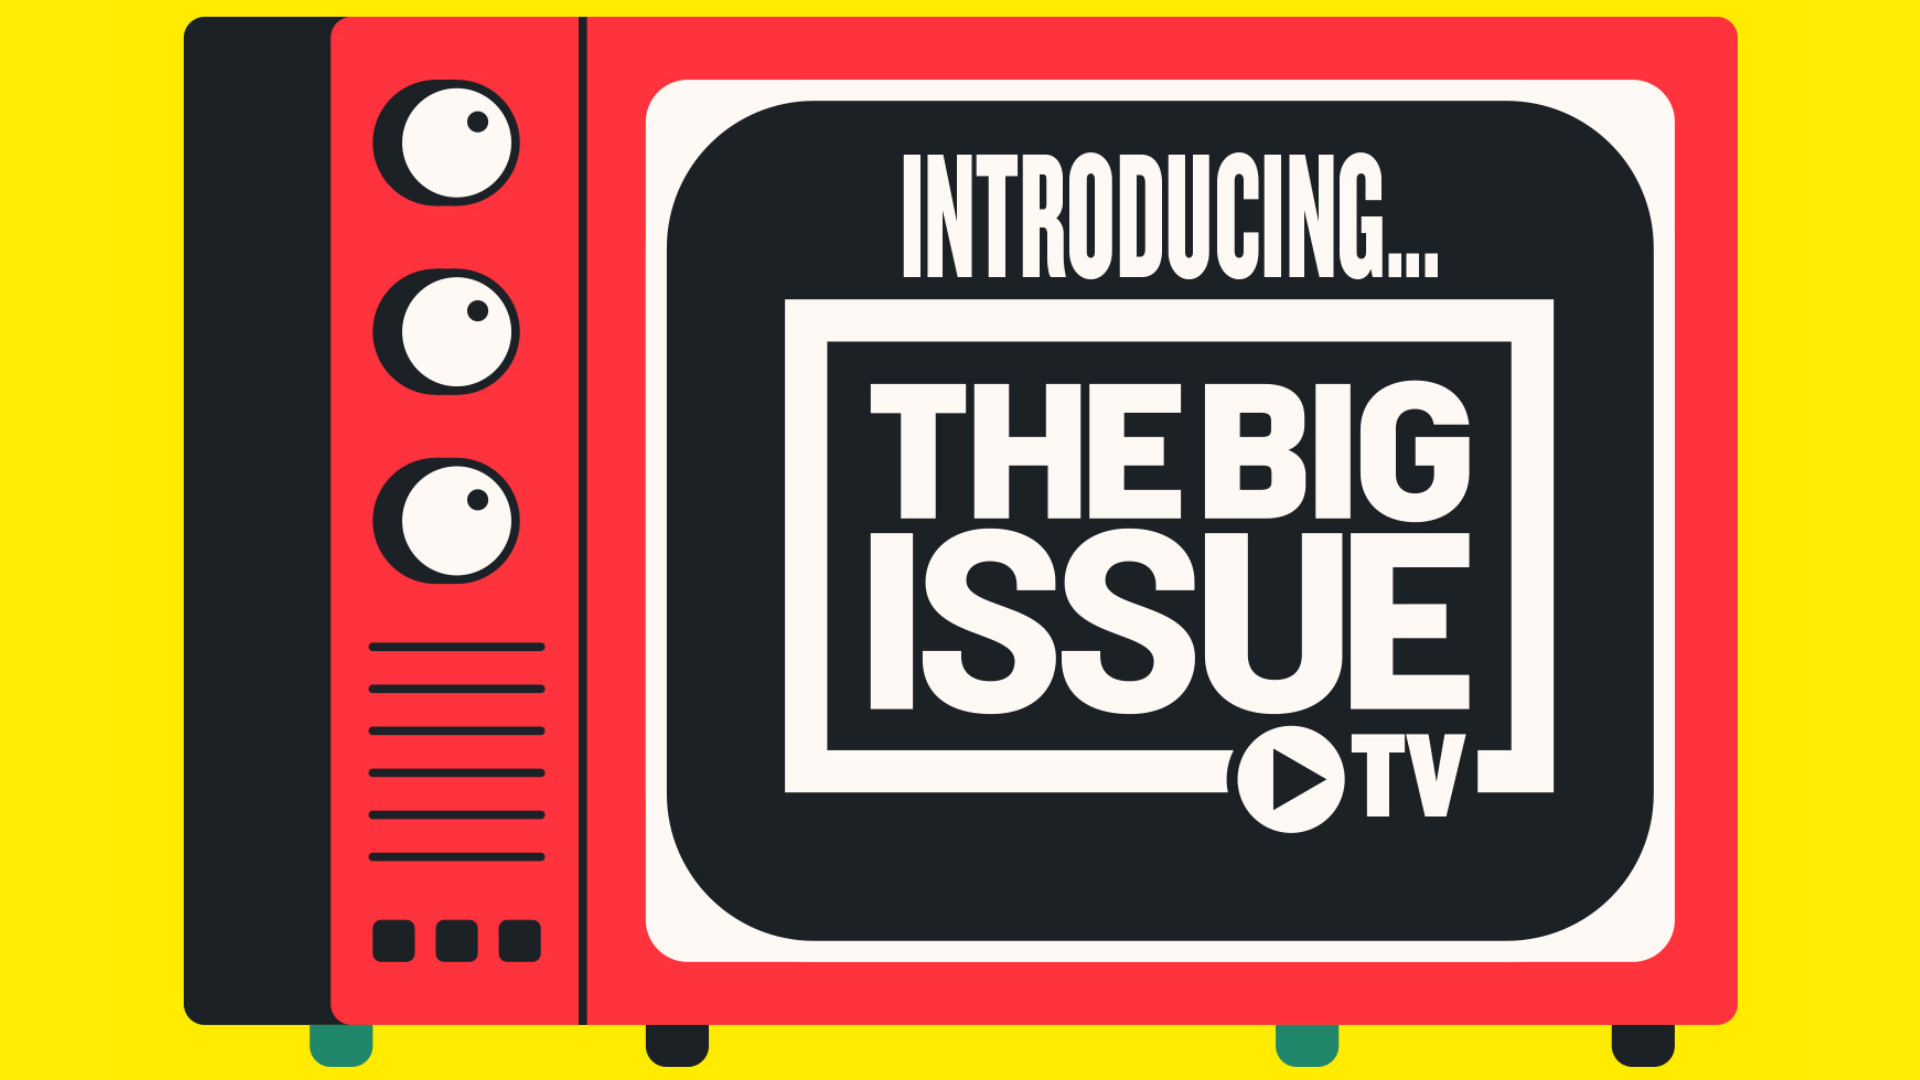 The Big Issue has launched a streaming service.